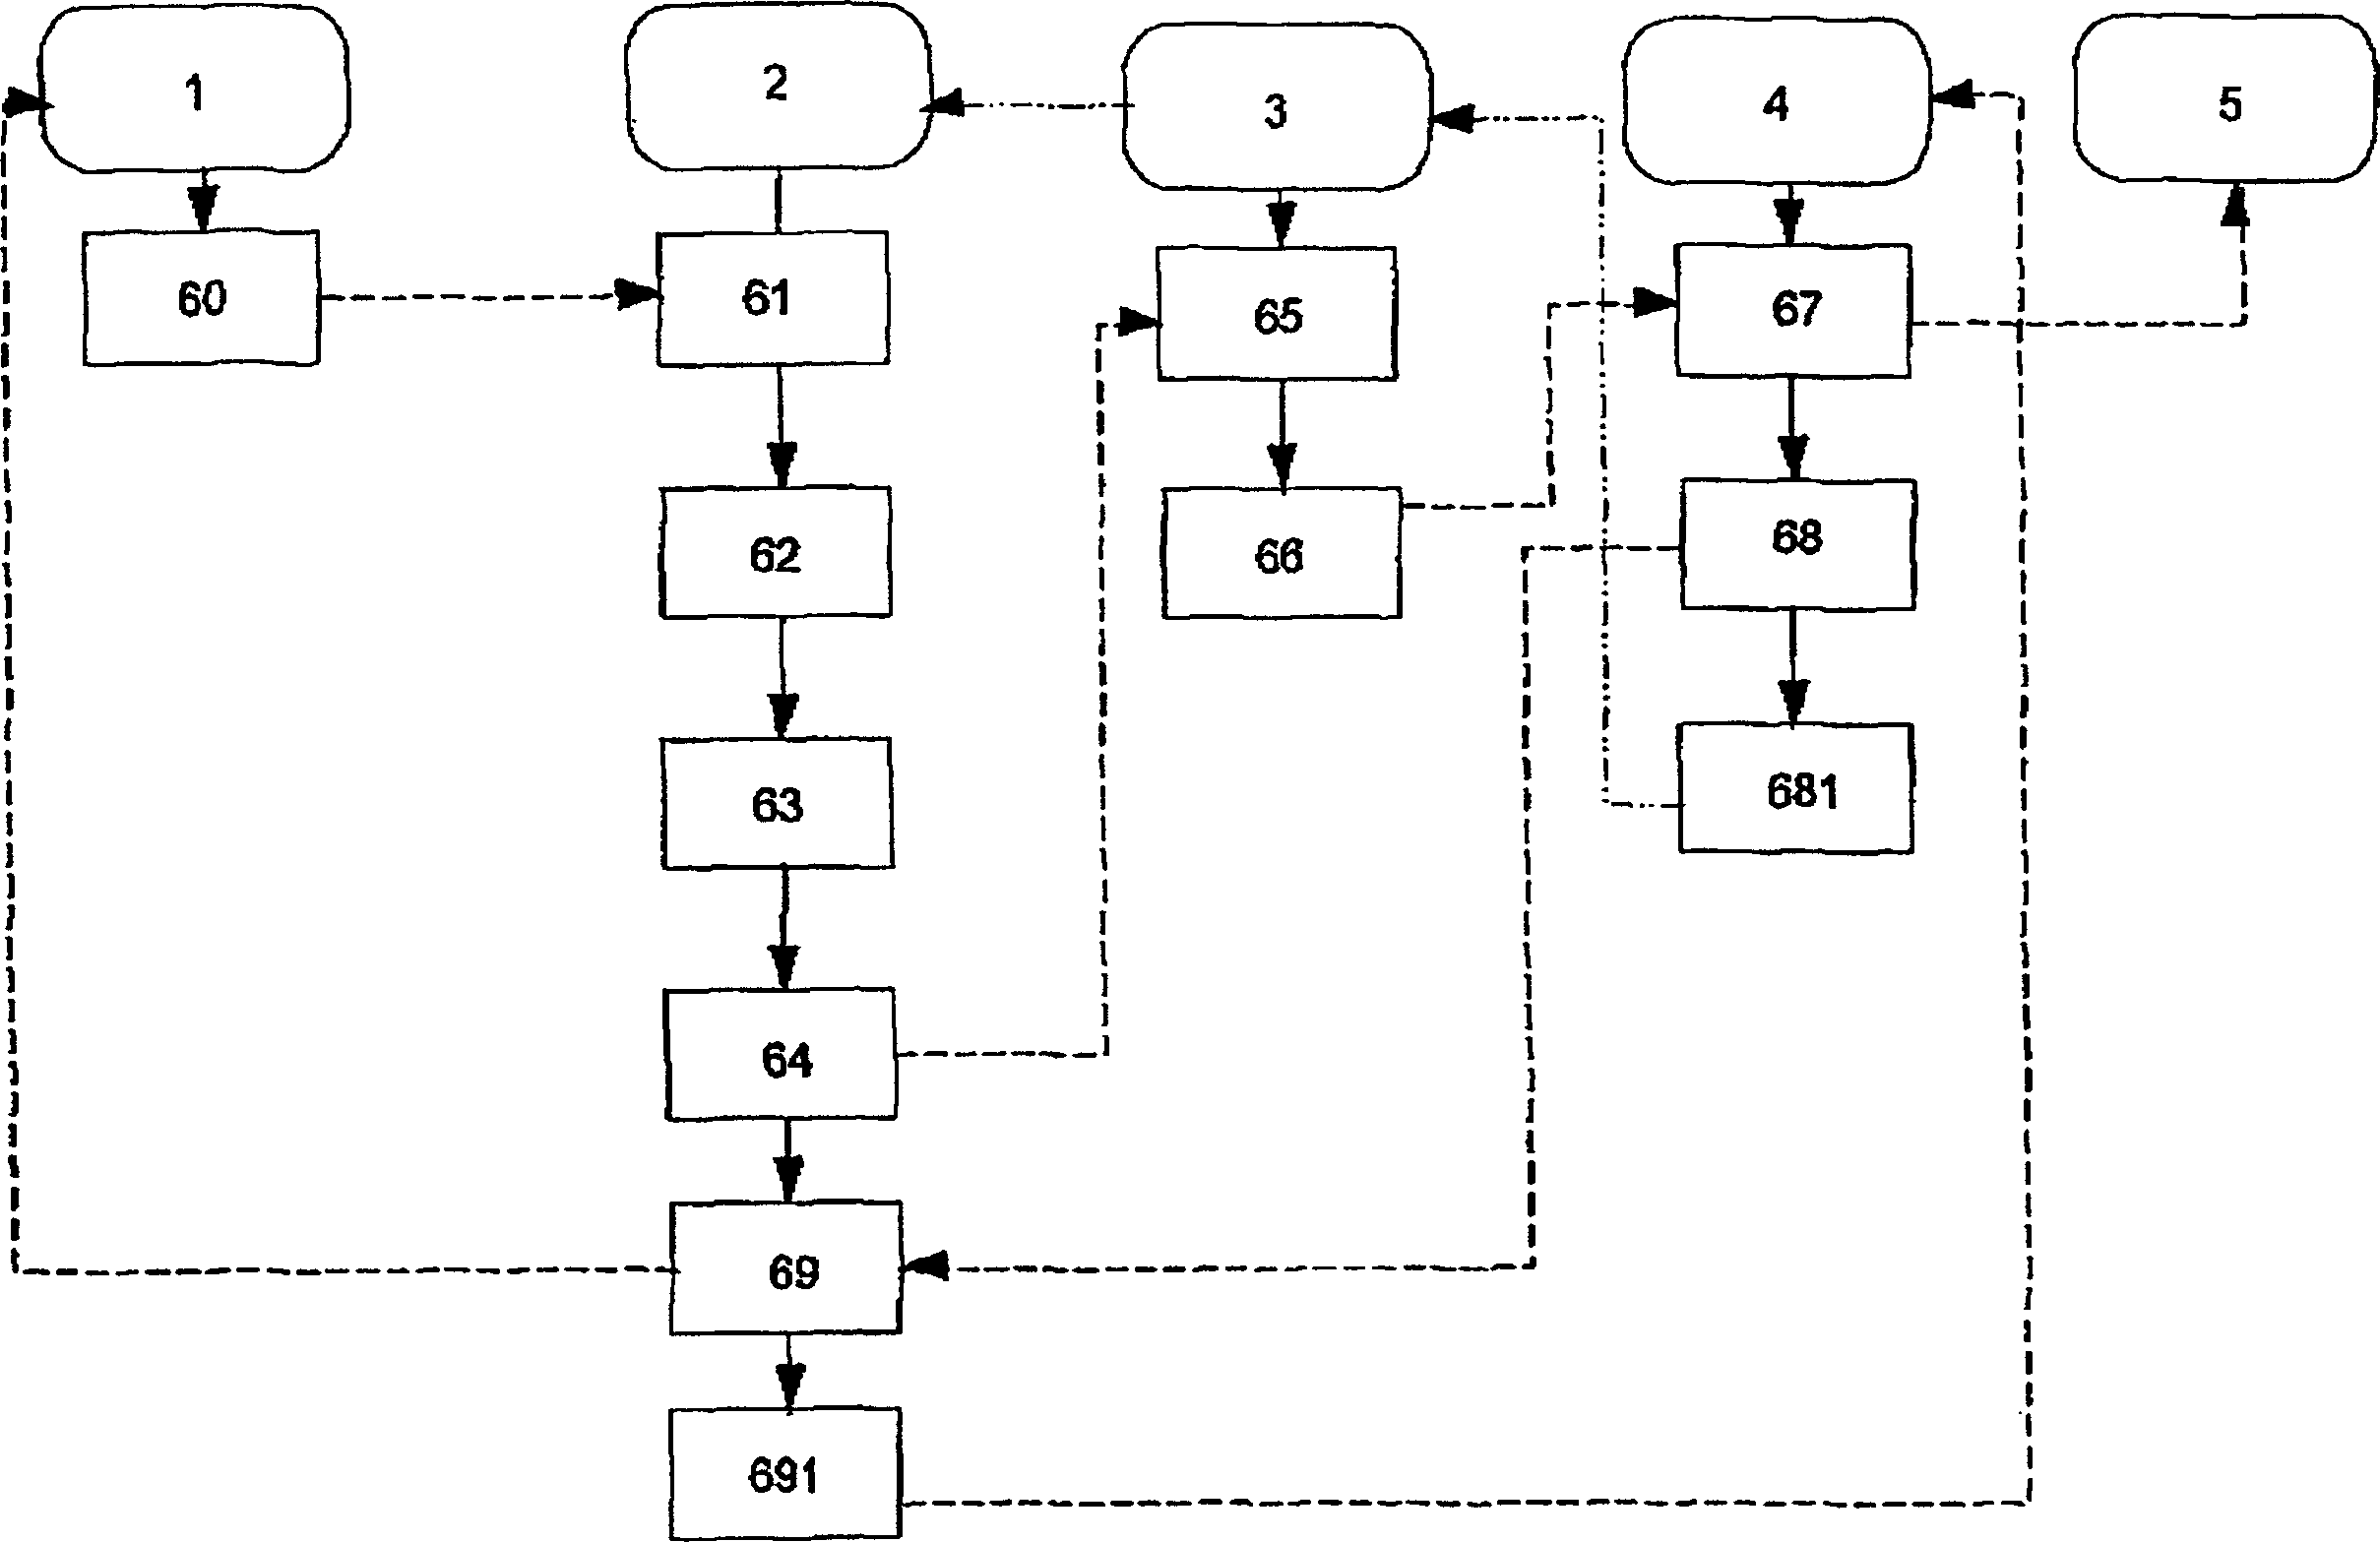 Method for recharging a subscription card using wireless equipment